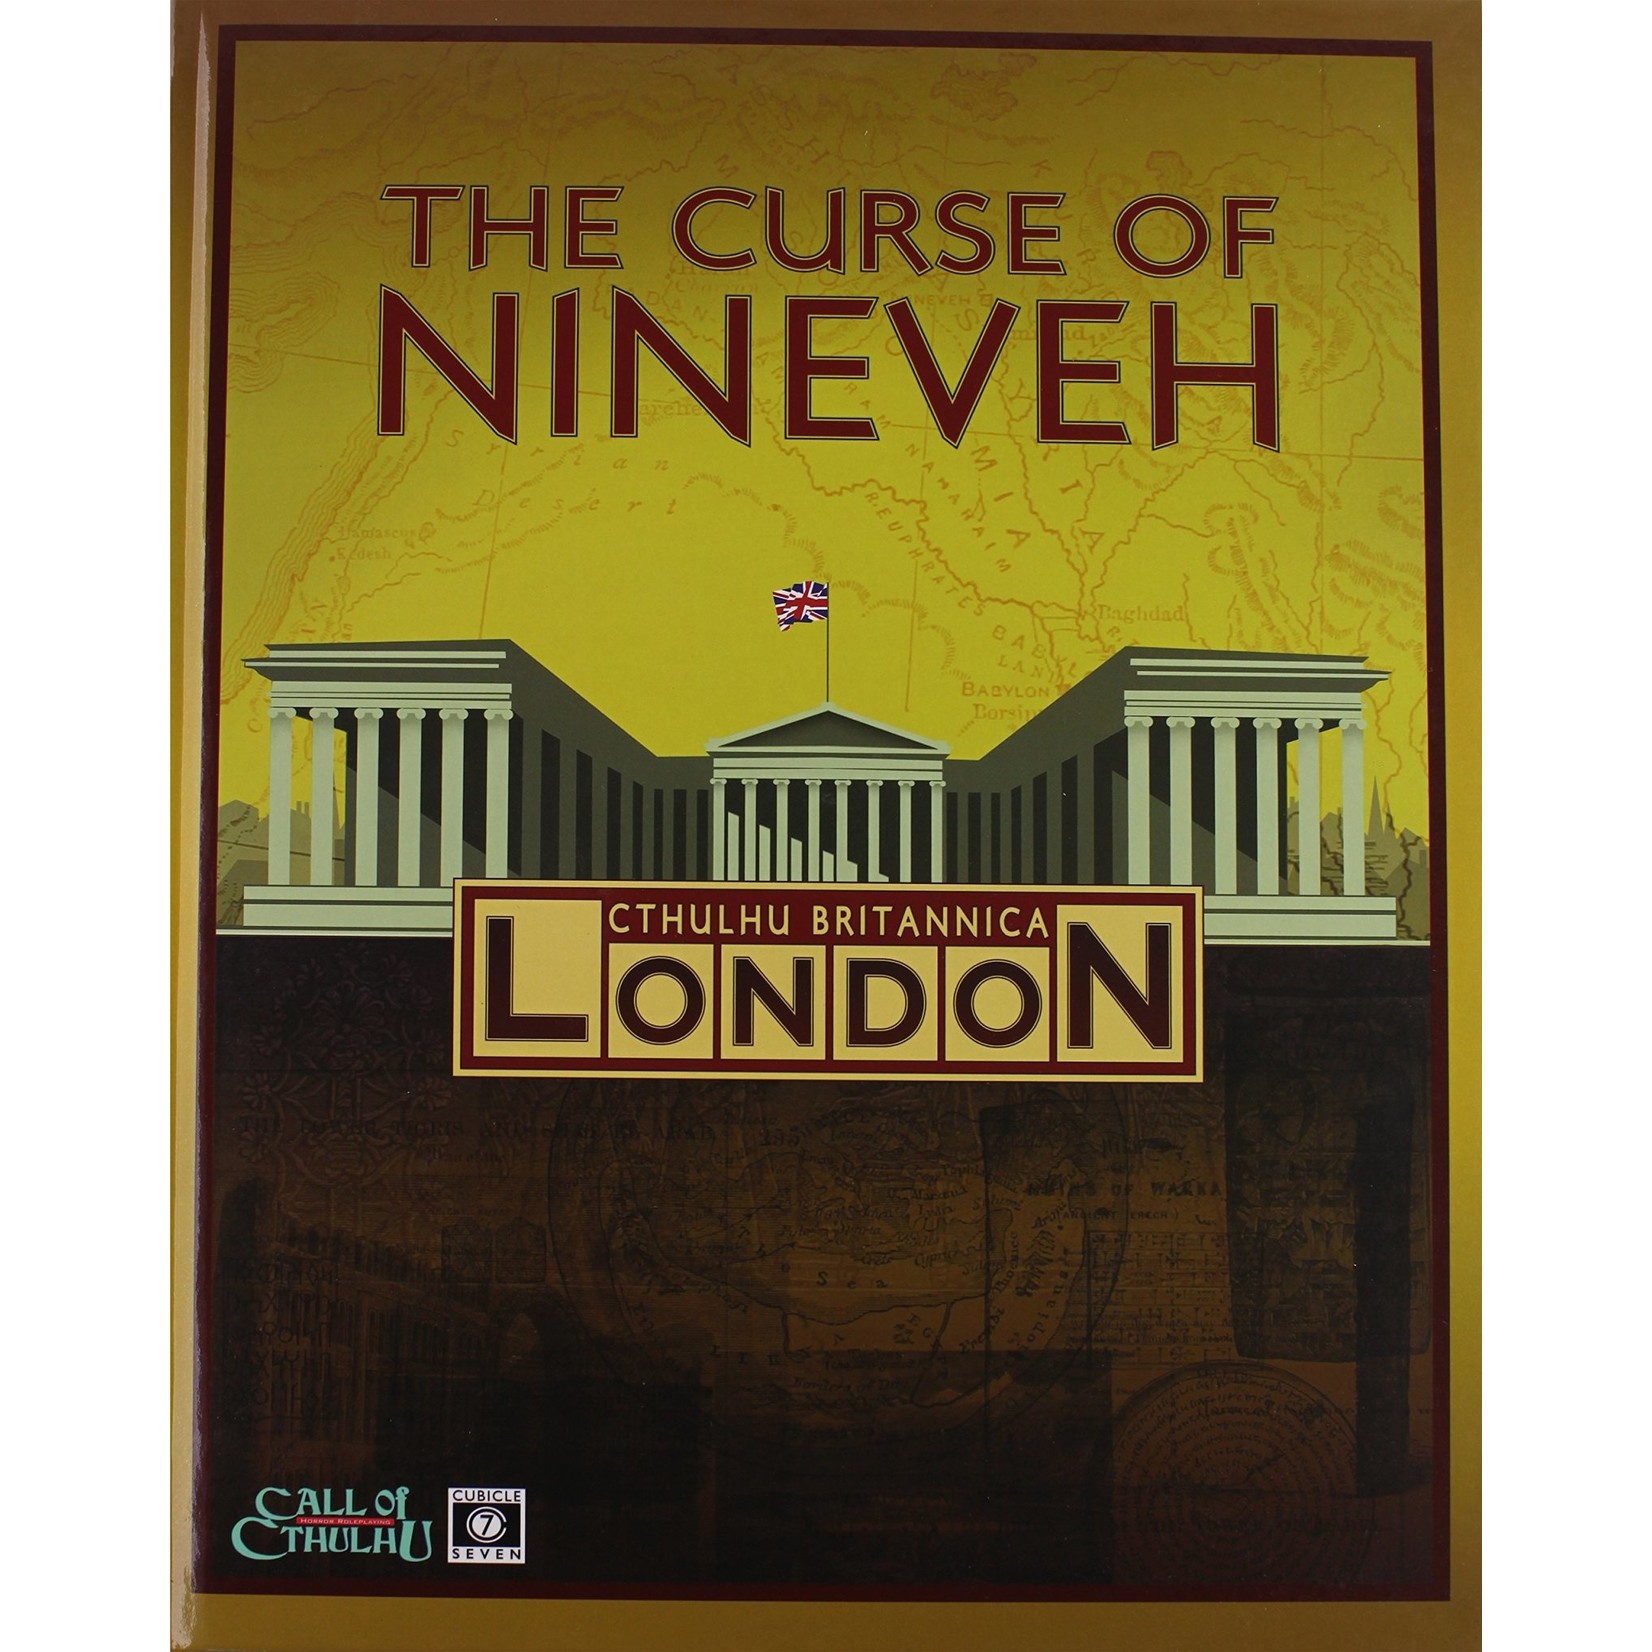 Cthulhu Britannica London: The Curse of Nineveh Campaign